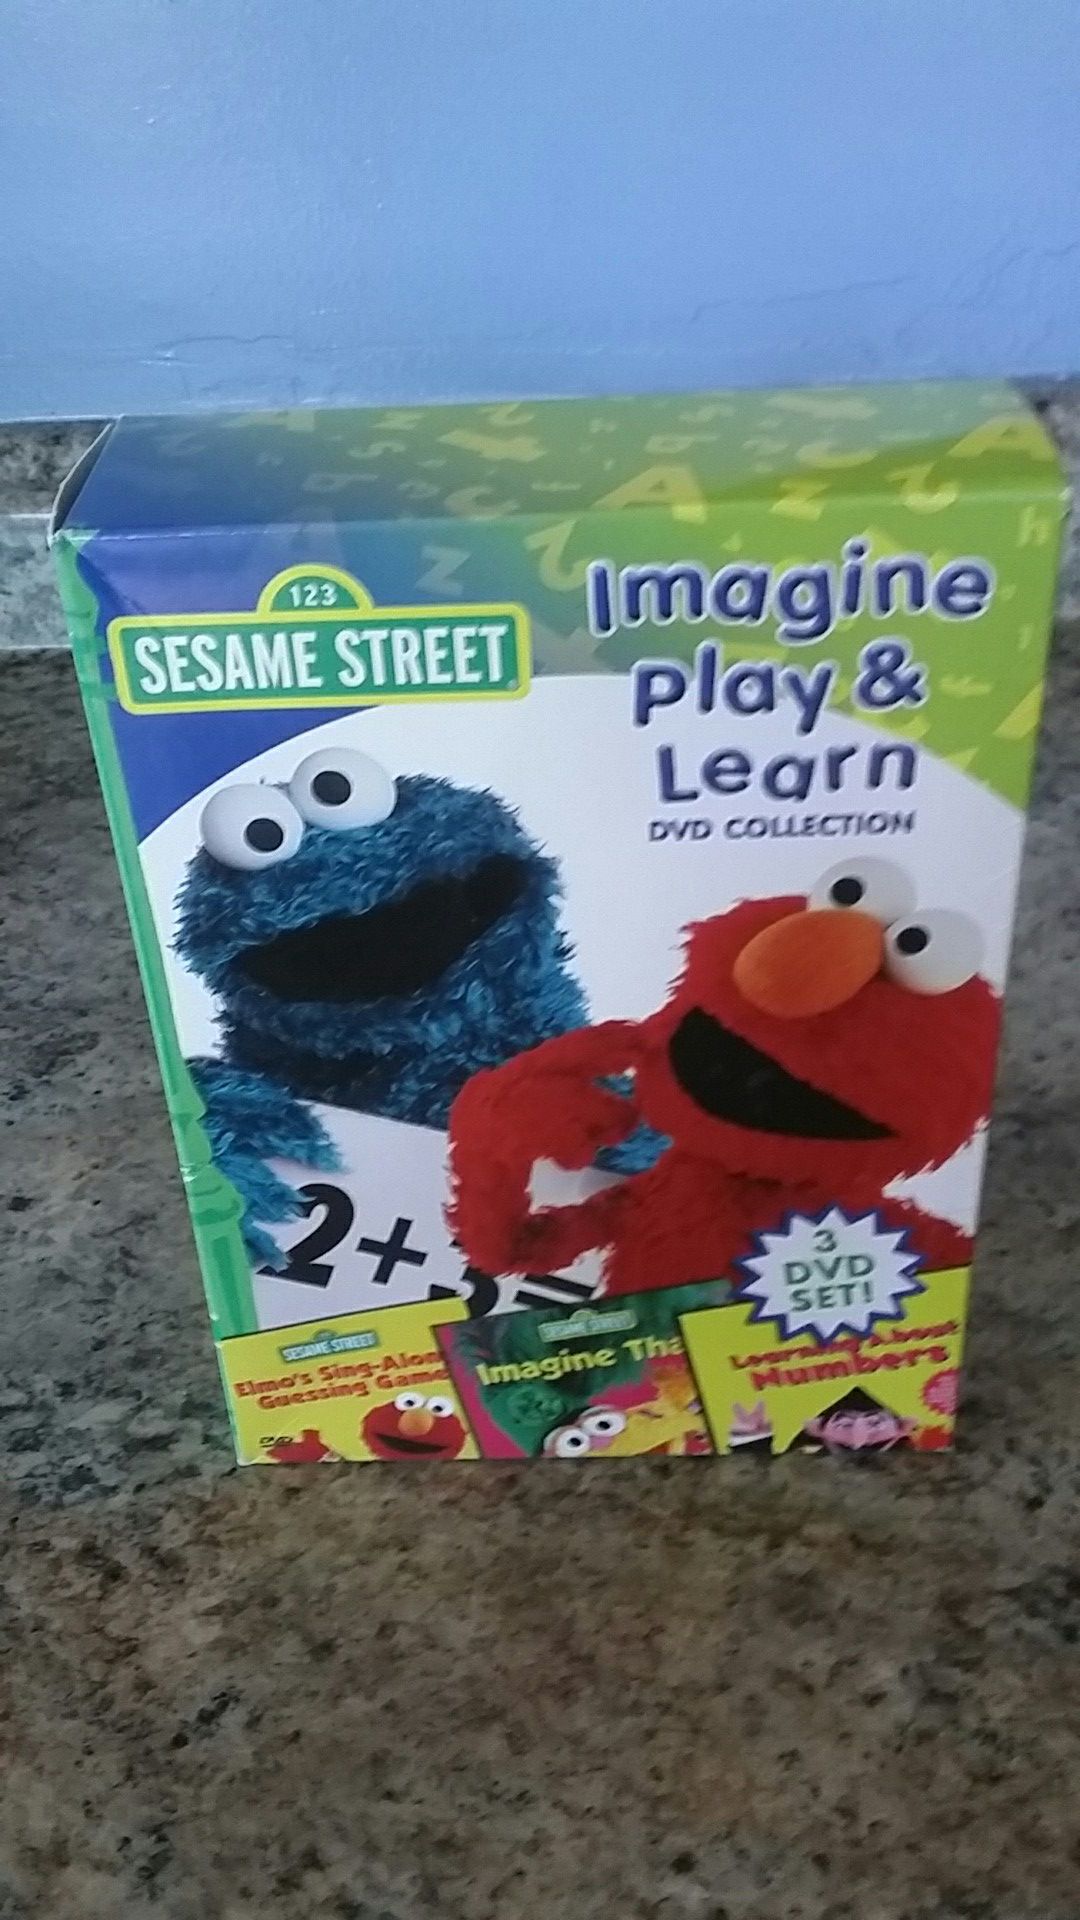 Imagine With Me: Play With Me Sesame (DVD) 